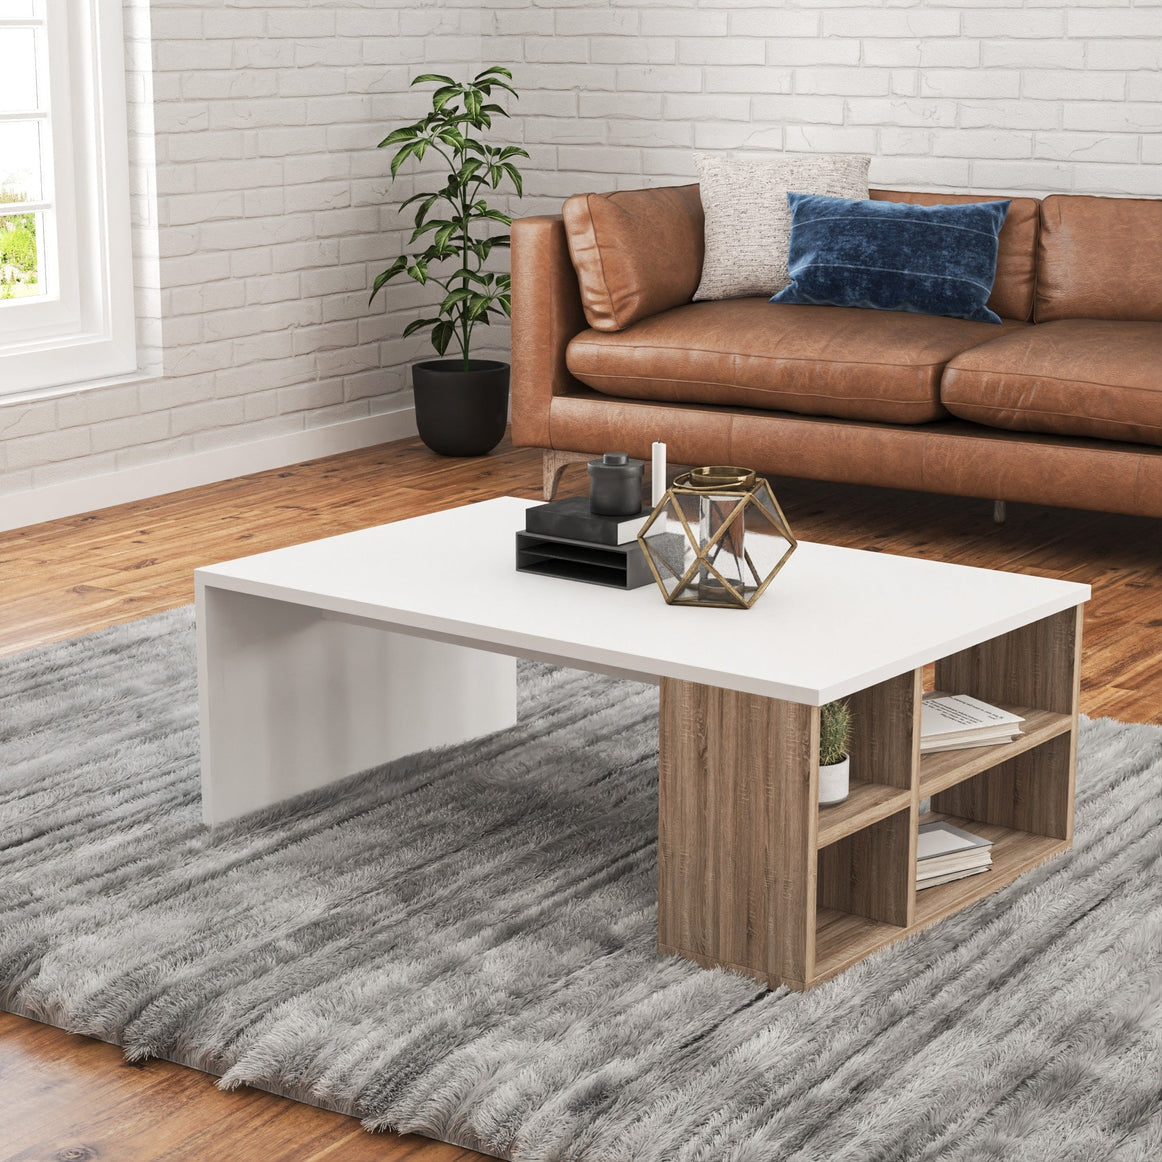 Spyder  Craft Coffee Table // Centre Table : White -Walnut